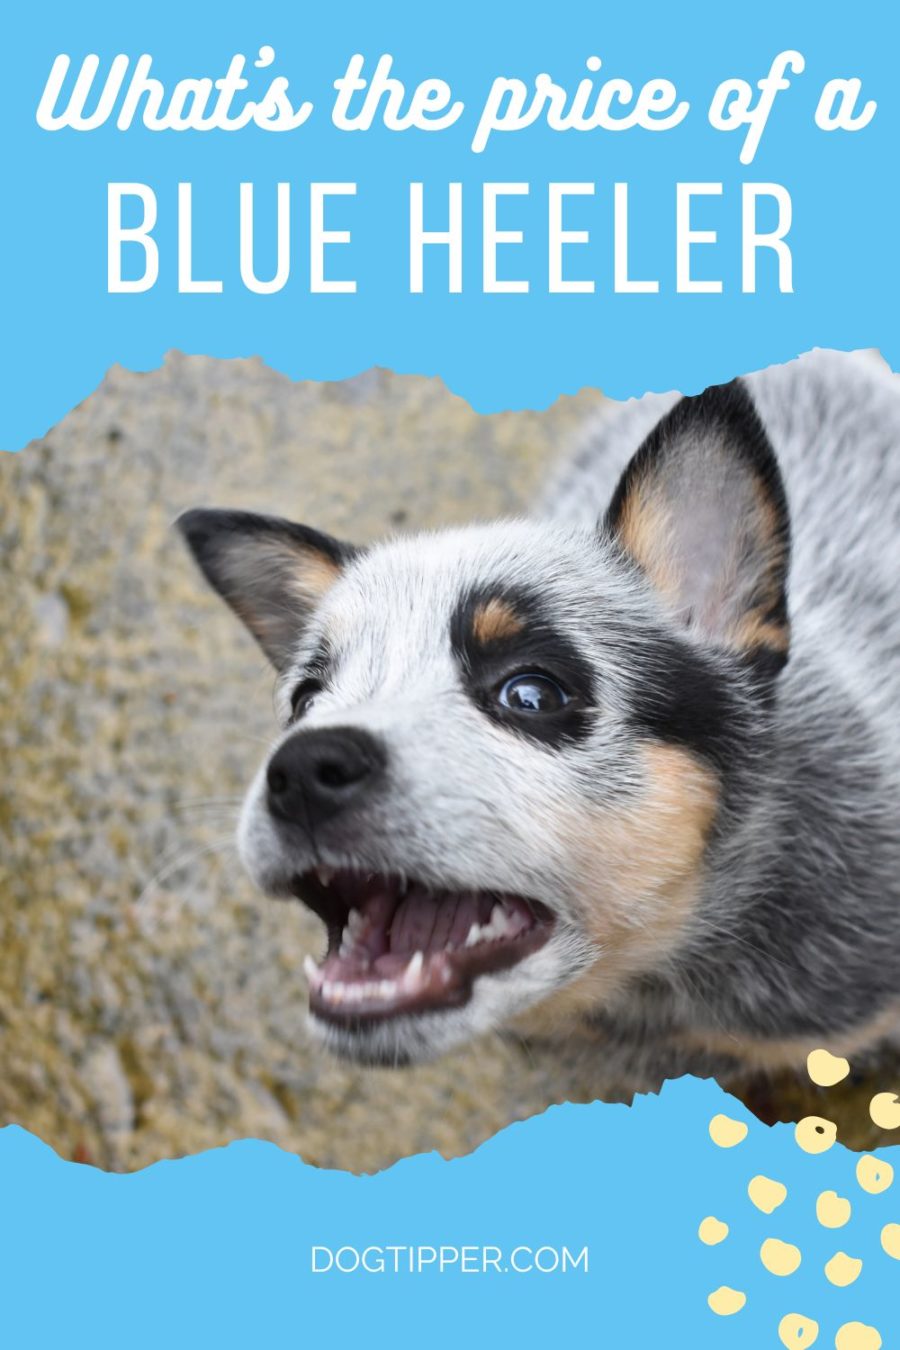 What's the price of a Blue Heeler?